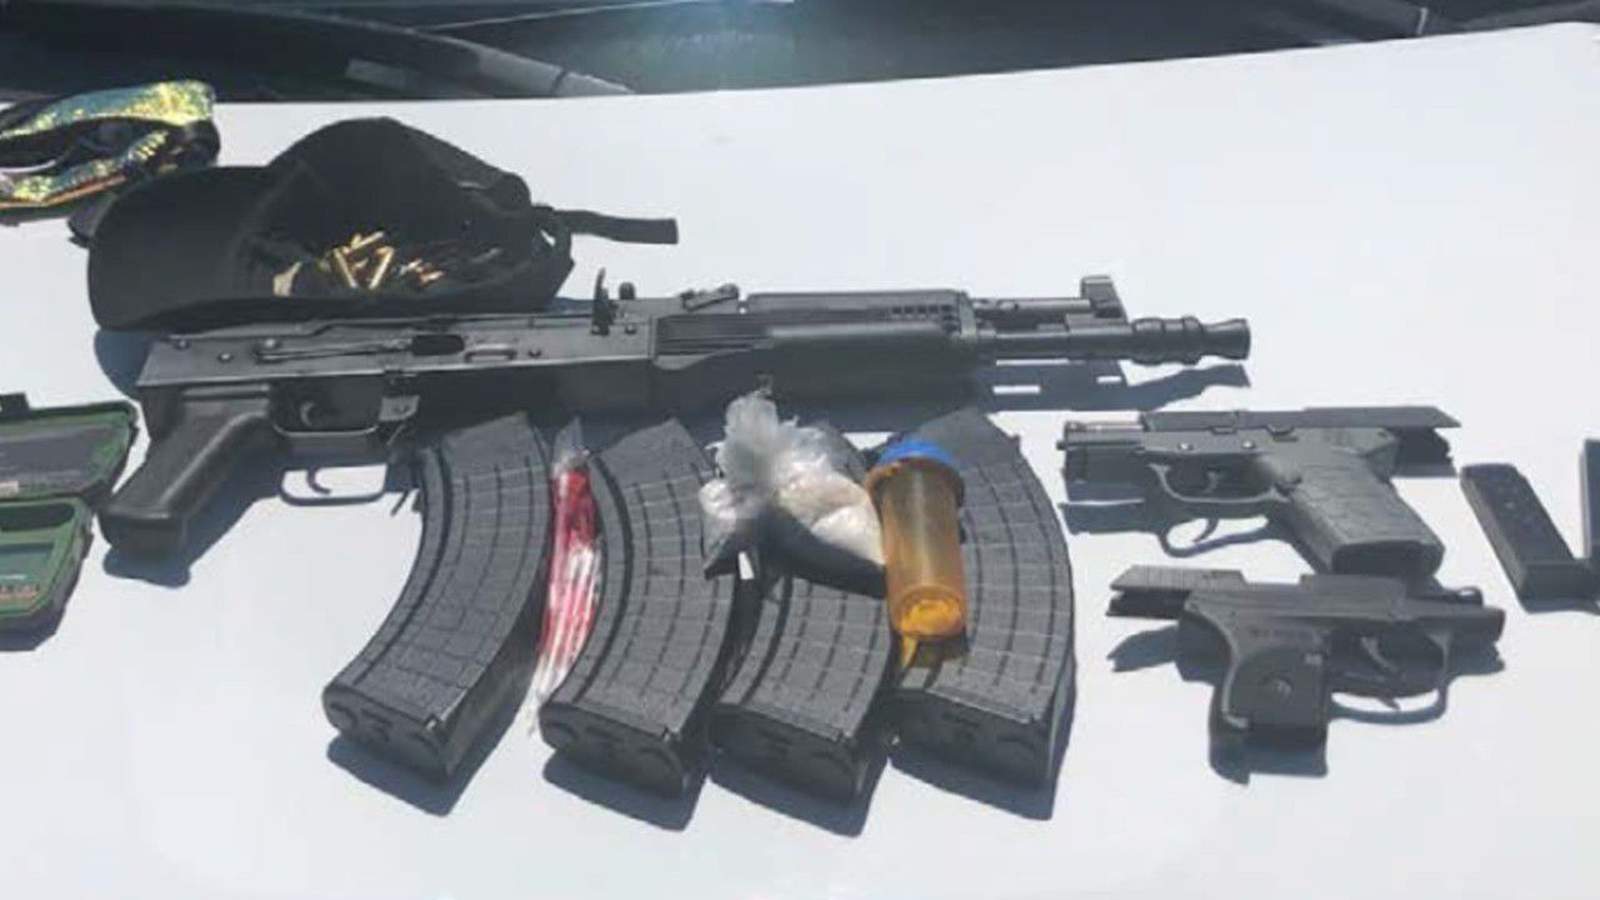 Video: ‘Arsenal of weapons,’ drugs found in car after Flagler road-rage incident